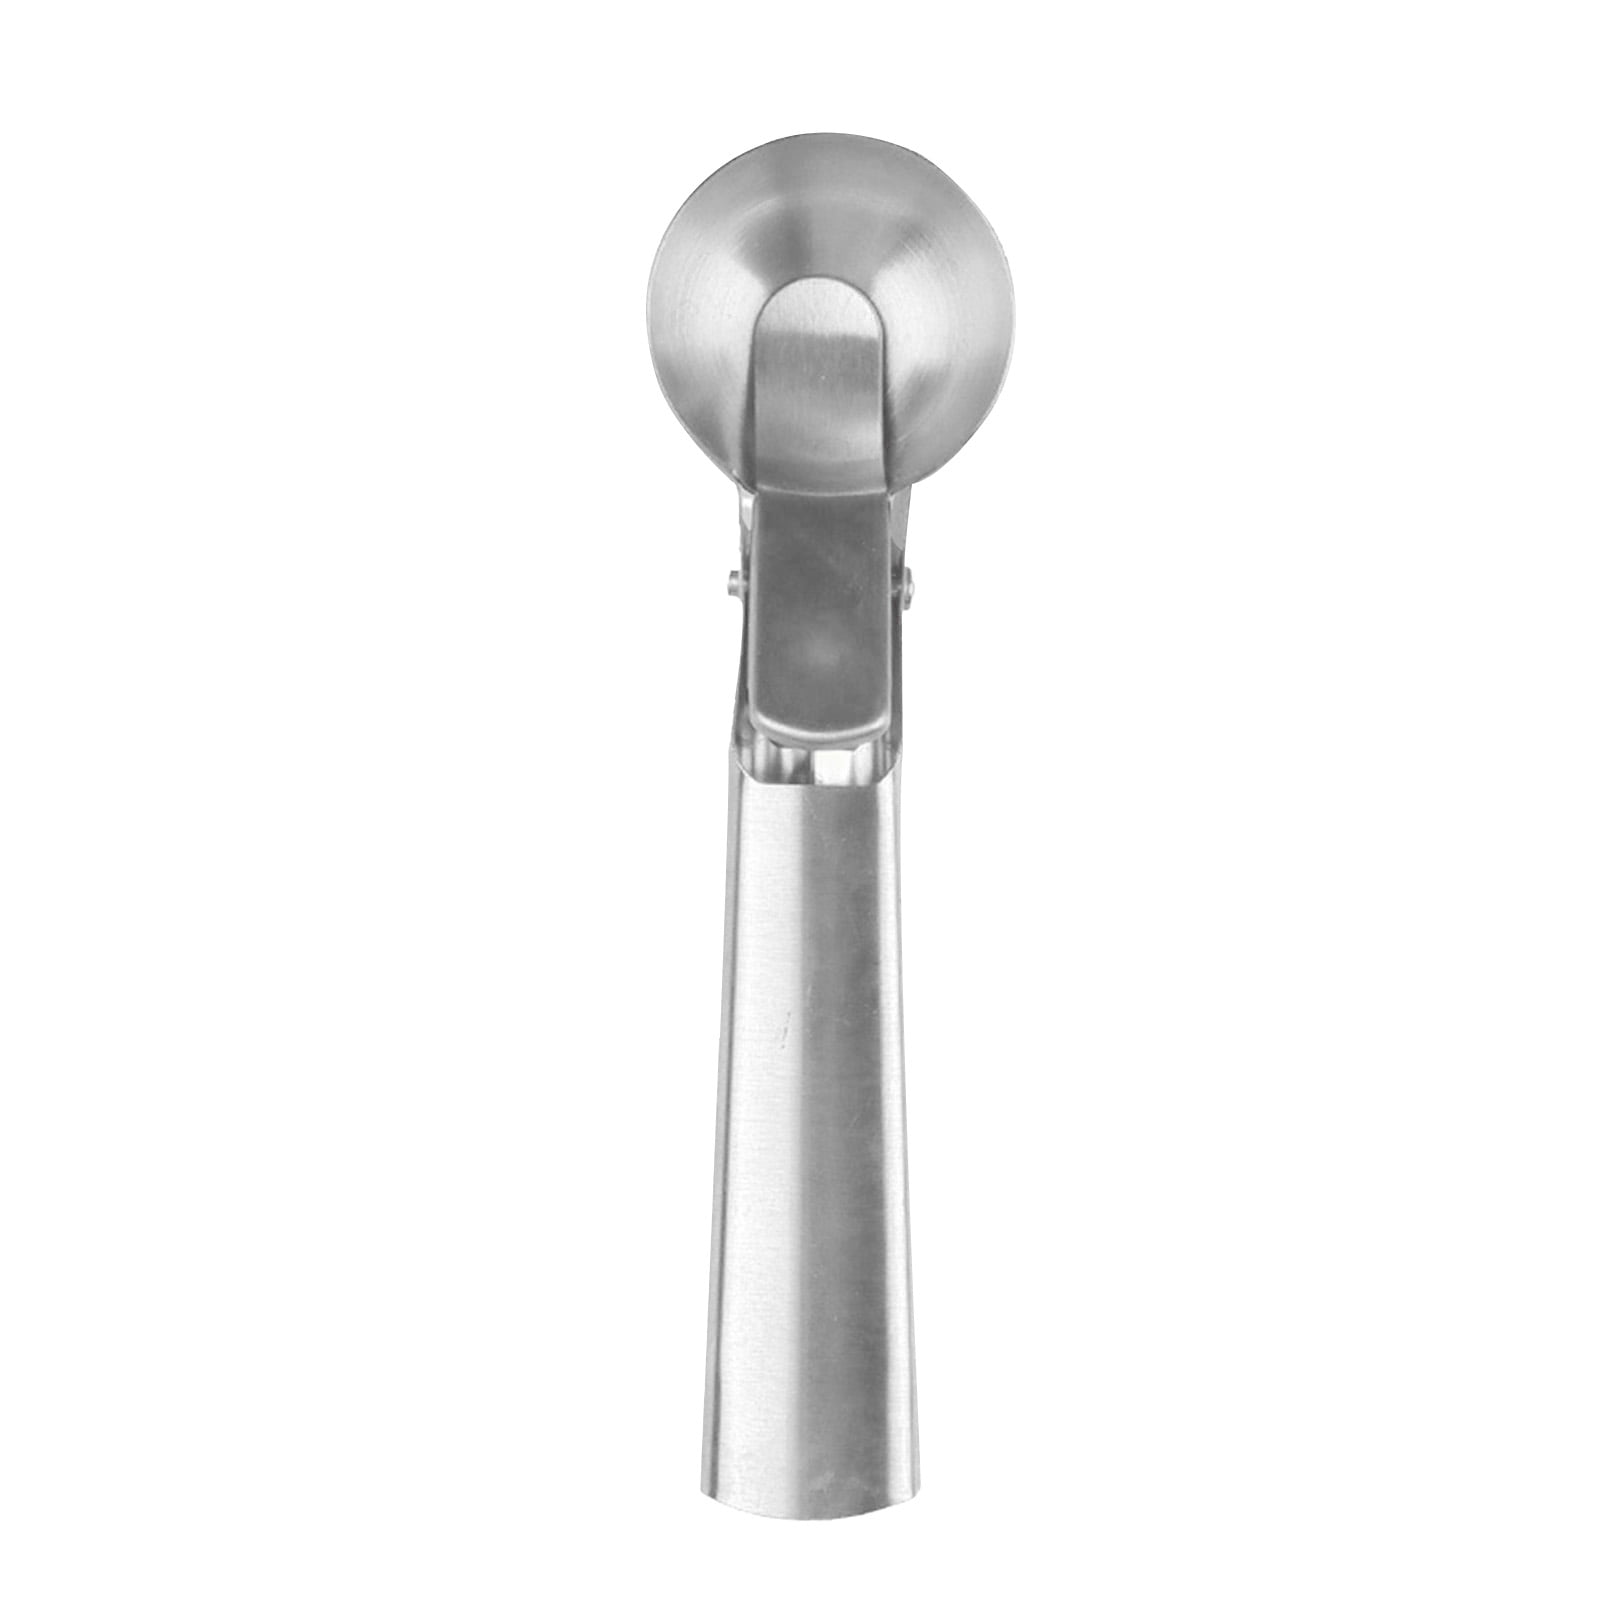  Winco Aluminum Utility Scoop, 24-Ounce, Medium: Commercial Food  Scoops: Home & Kitchen